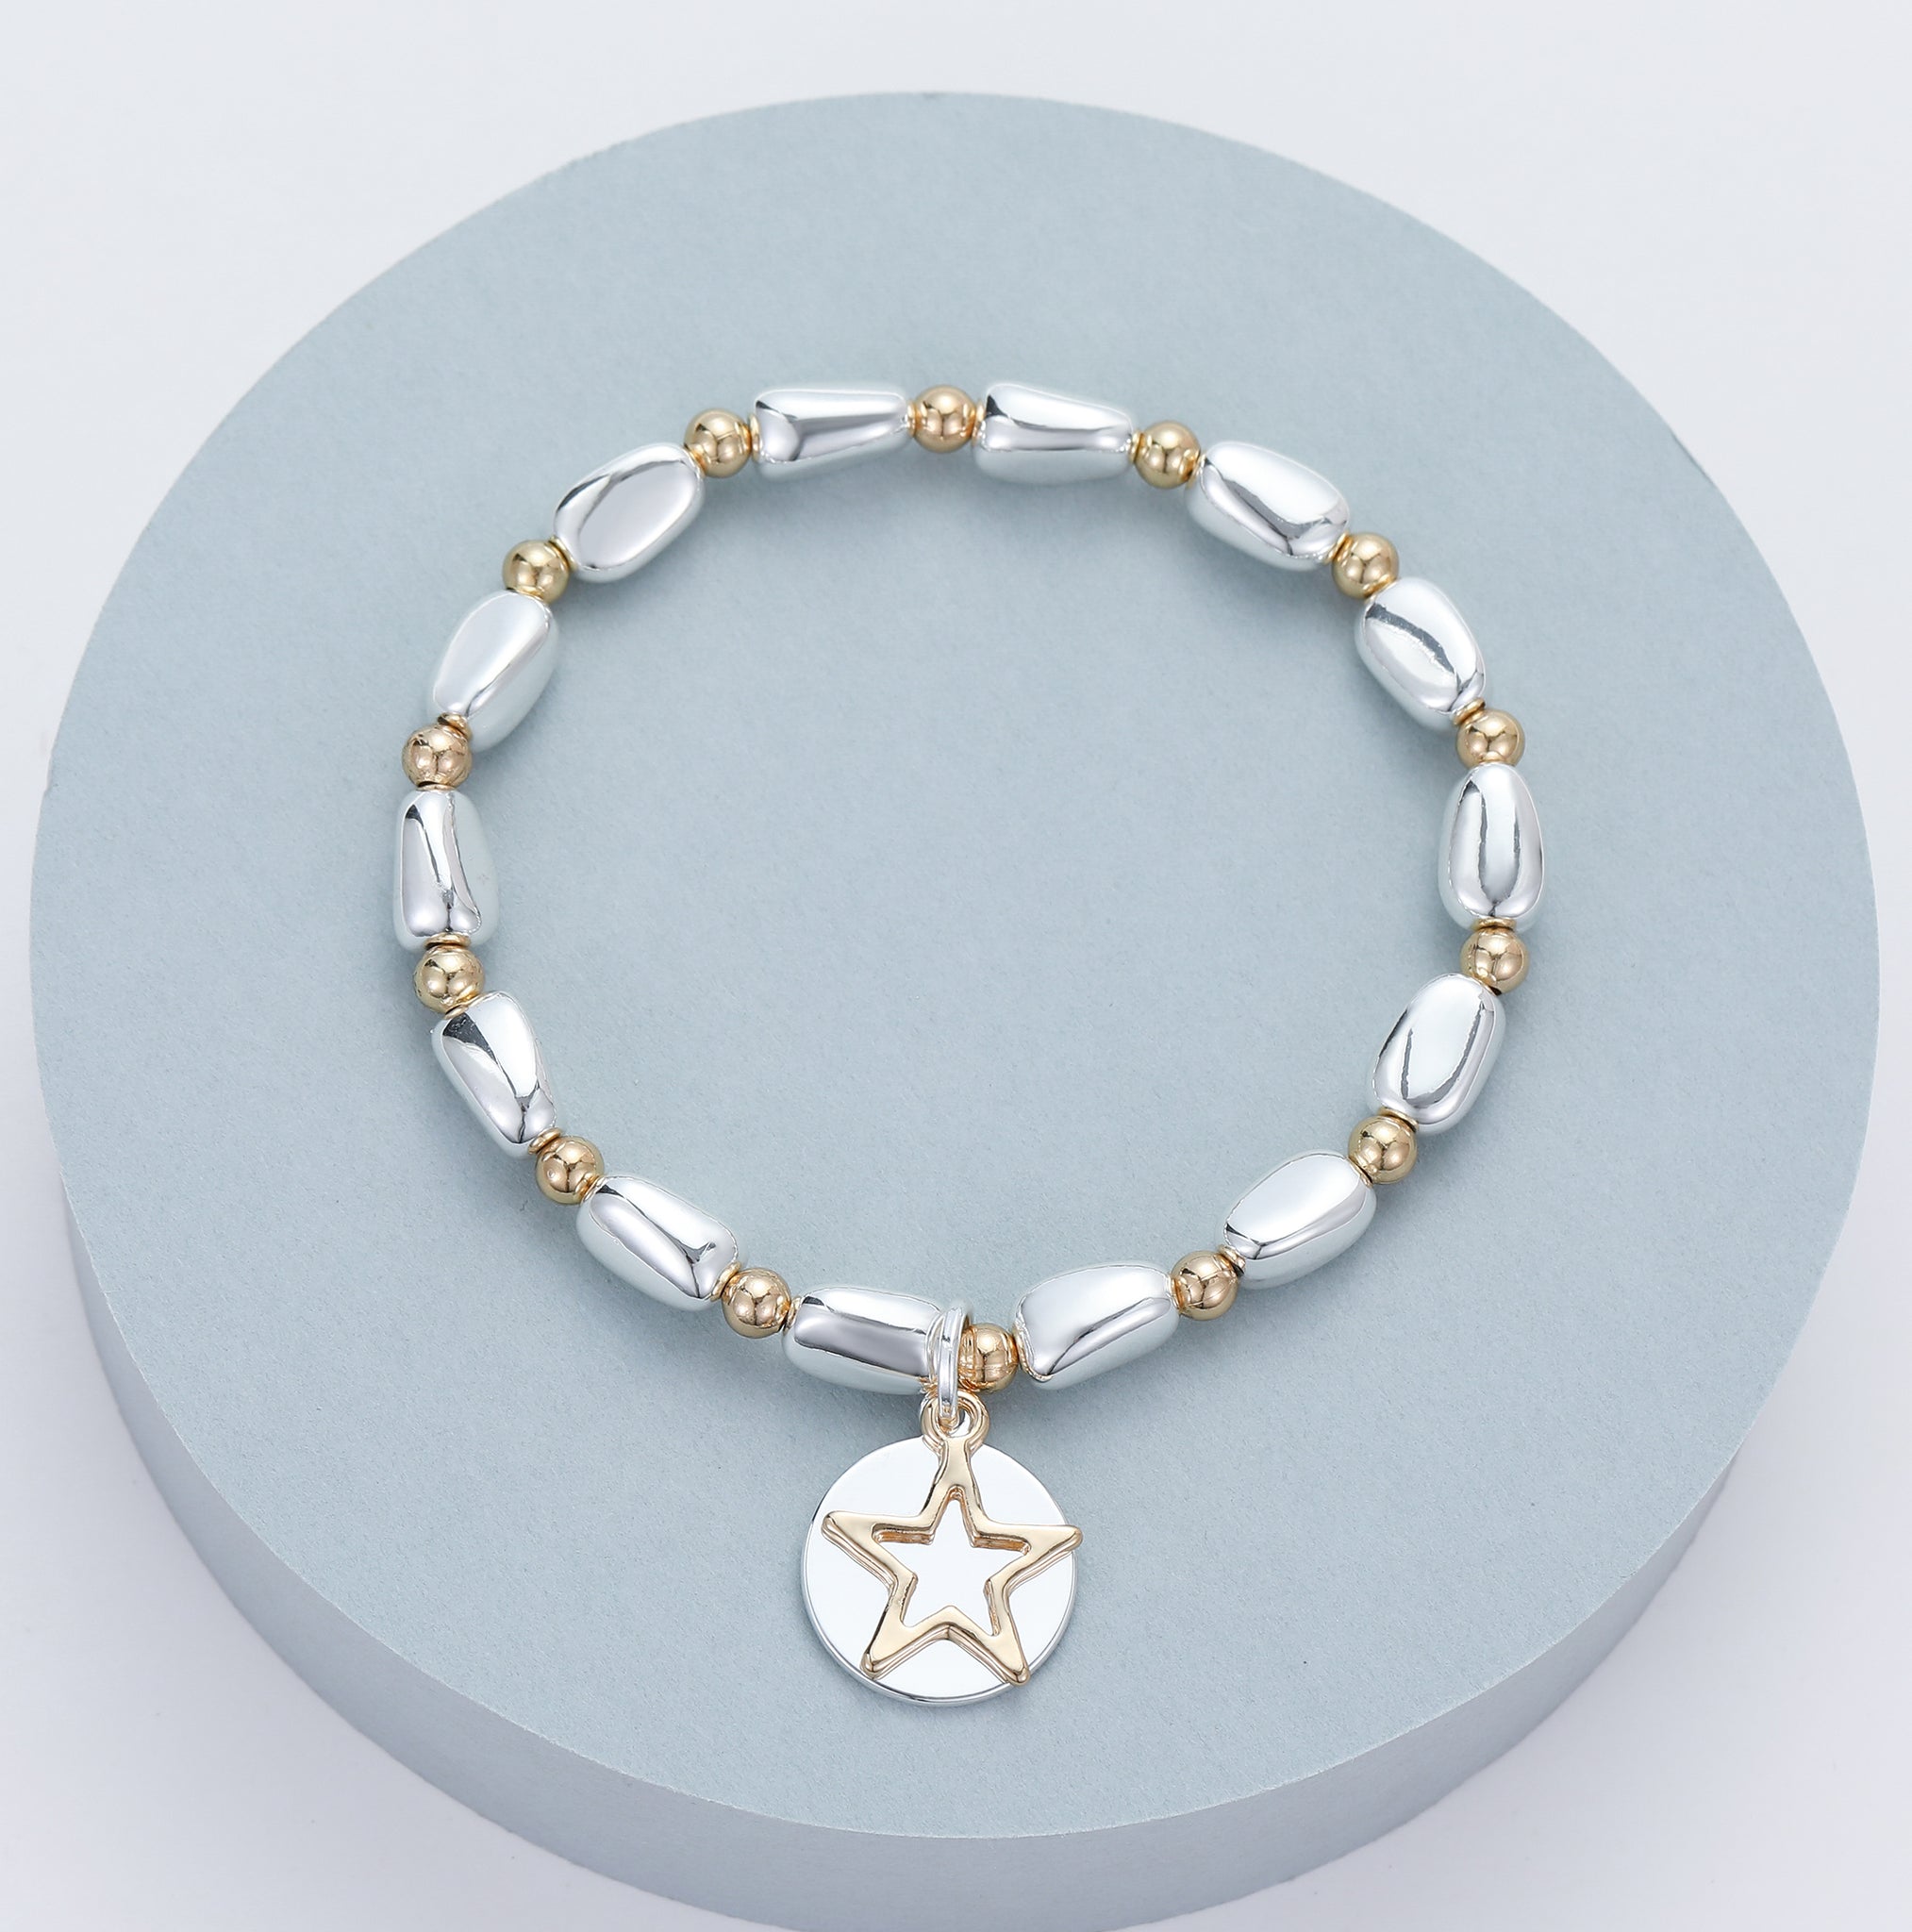 Silver with Gold Star Charm Bracelet